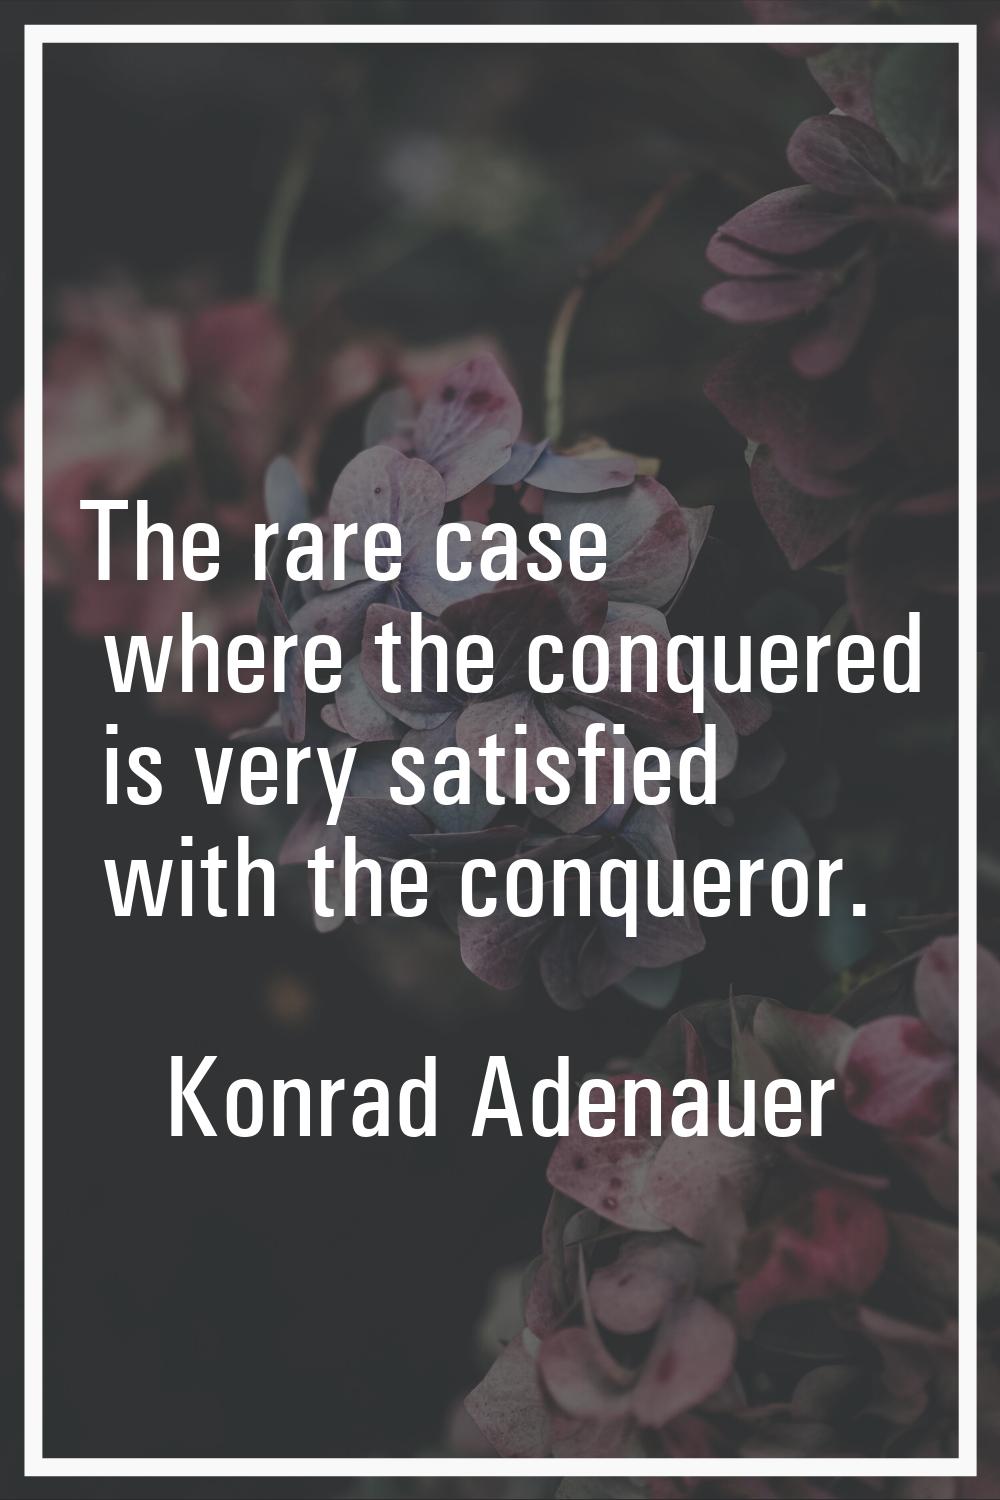 The rare case where the conquered is very satisfied with the conqueror.